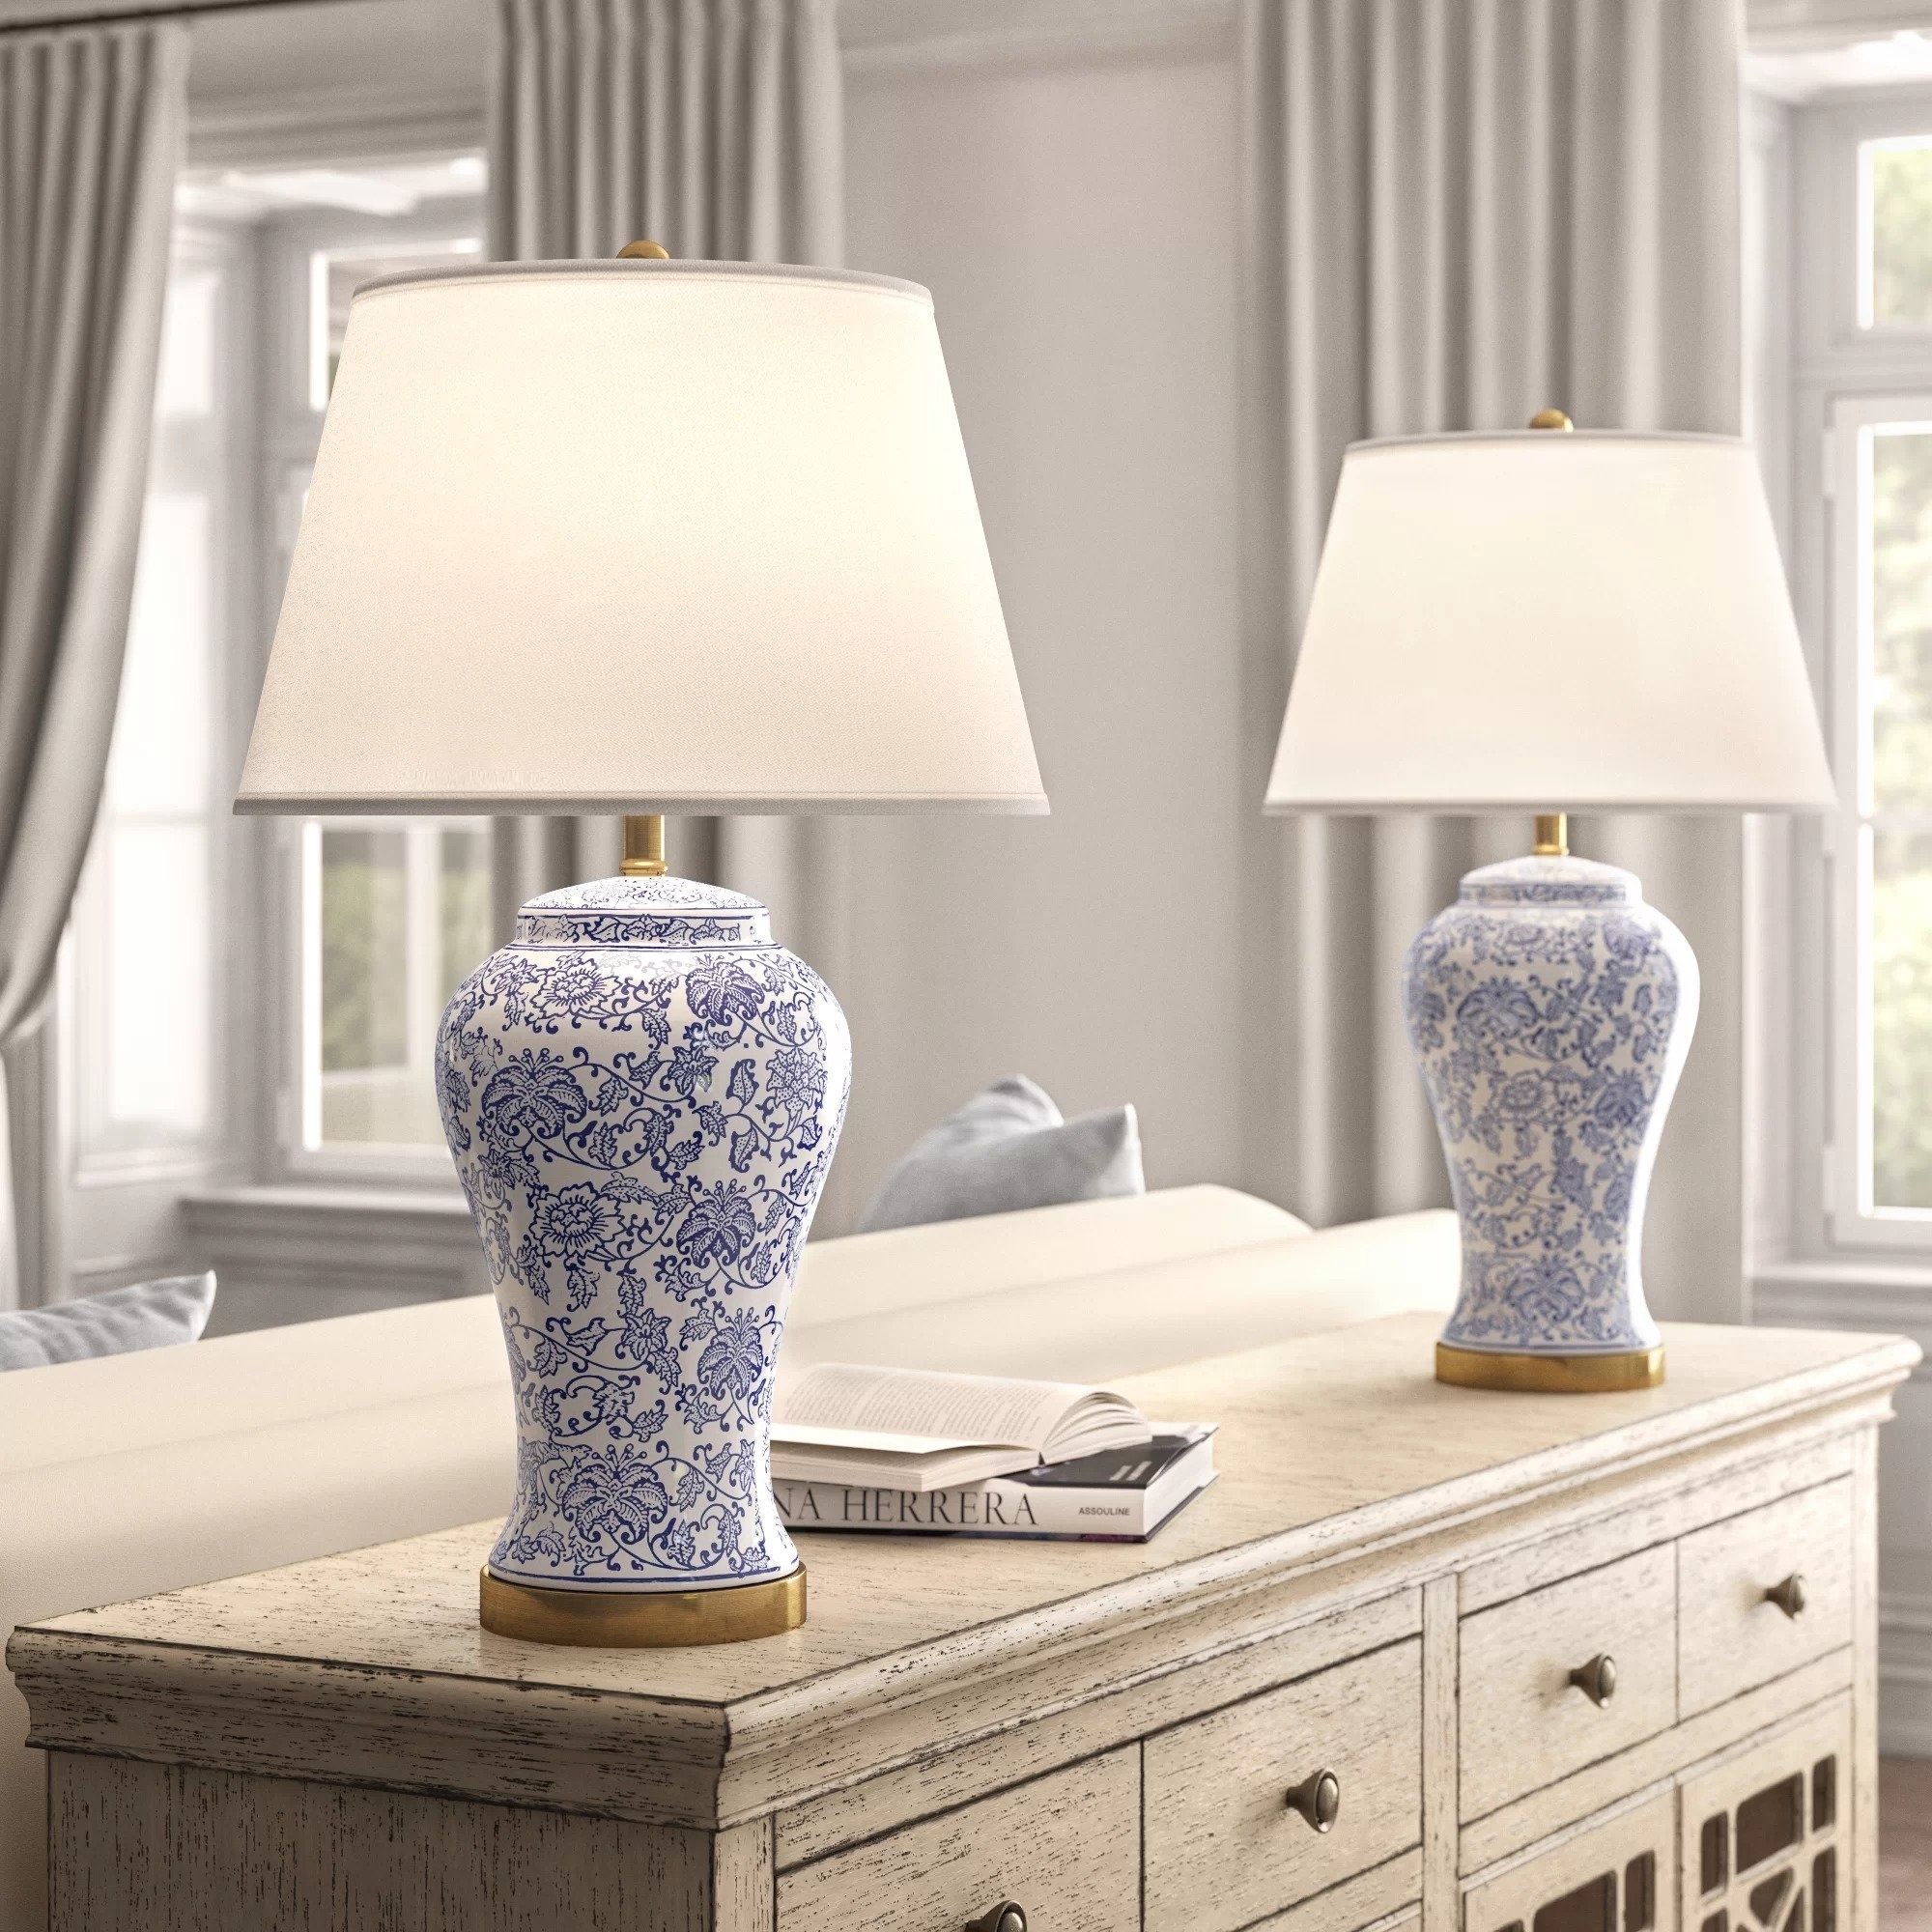 The lamps, with a base that features a blue and white floral design